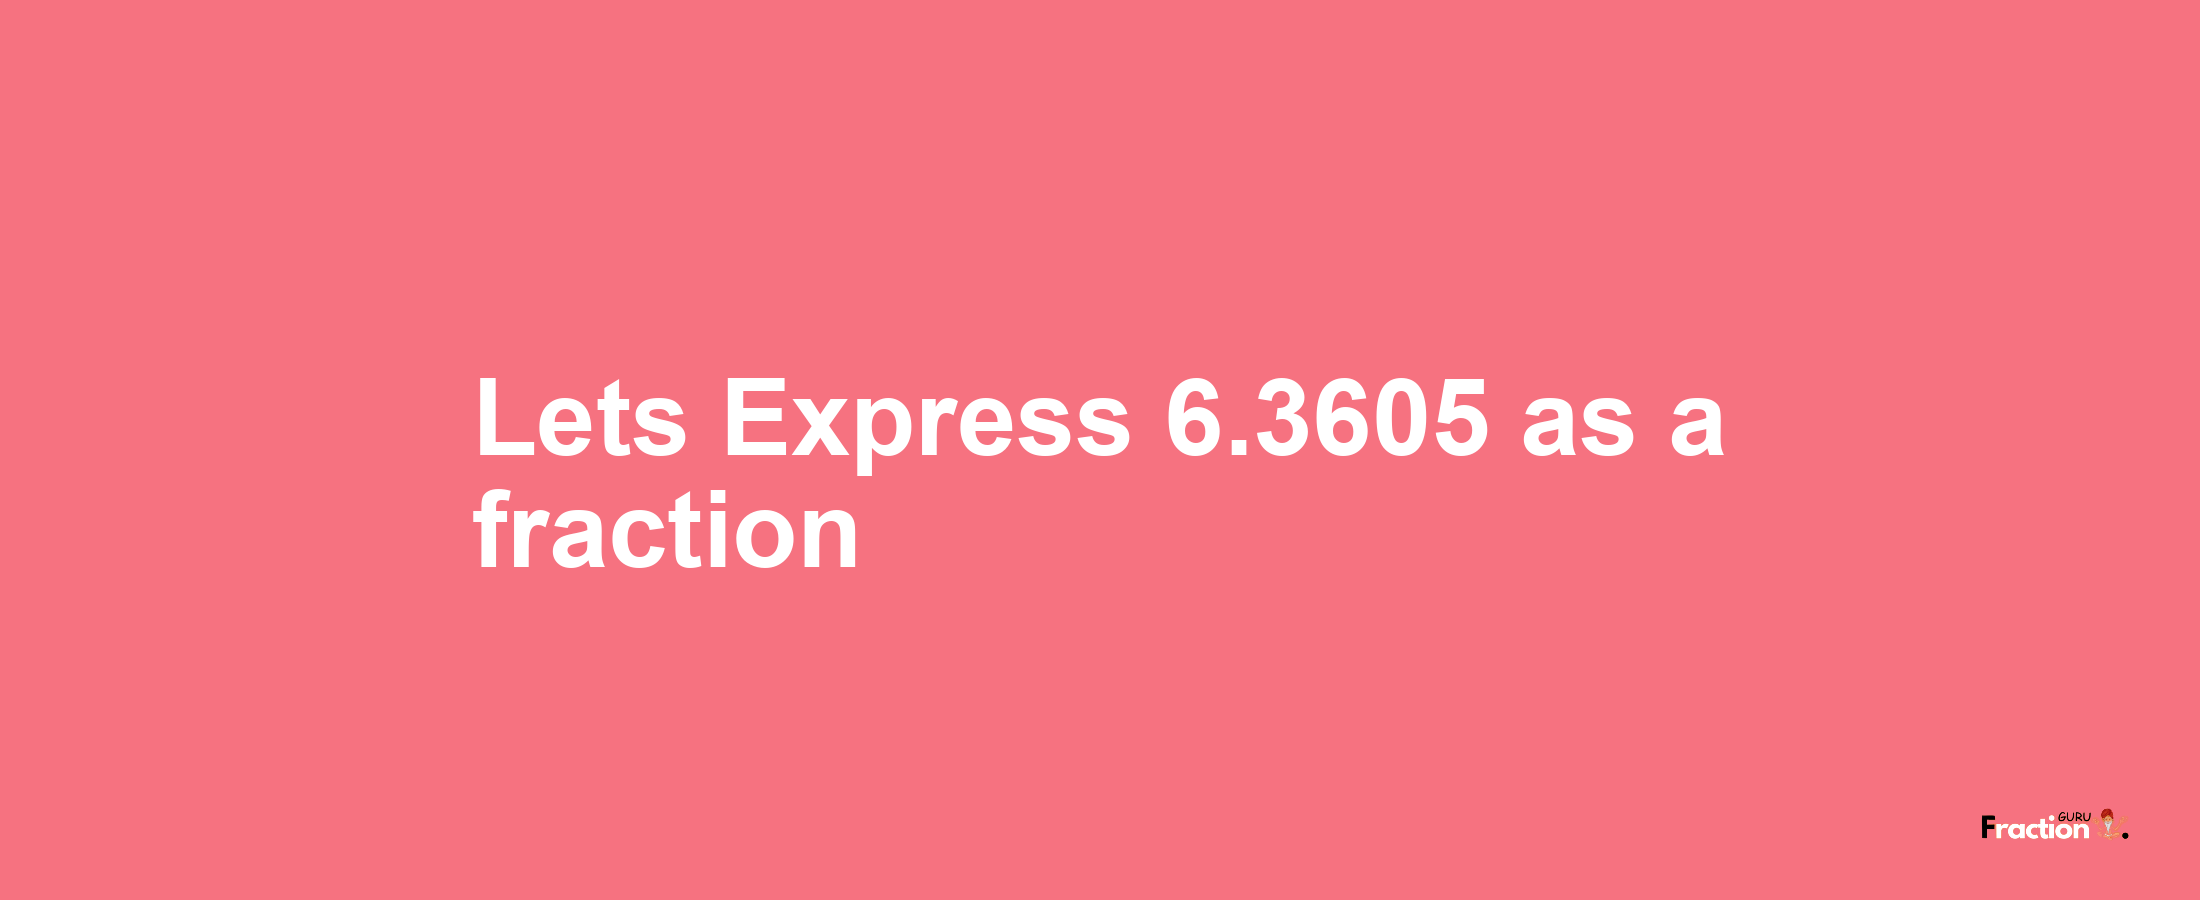 Lets Express 6.3605 as afraction